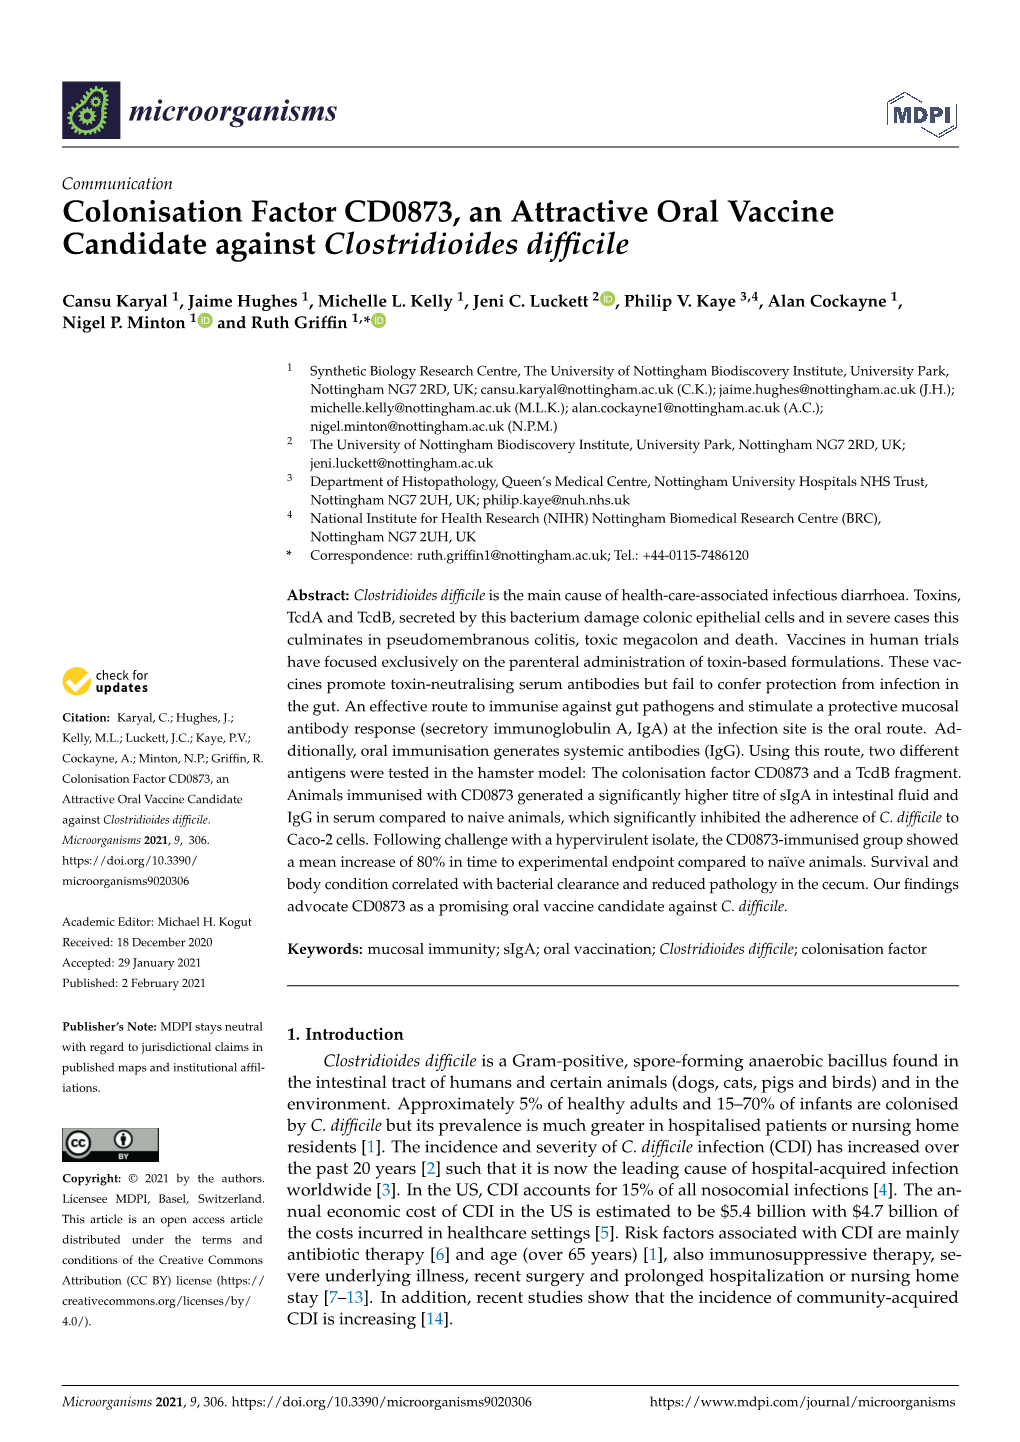 Colonisation Factor CD0873, an Attractive Oral Vaccine Candidate Against Clostridioides Difﬁcile